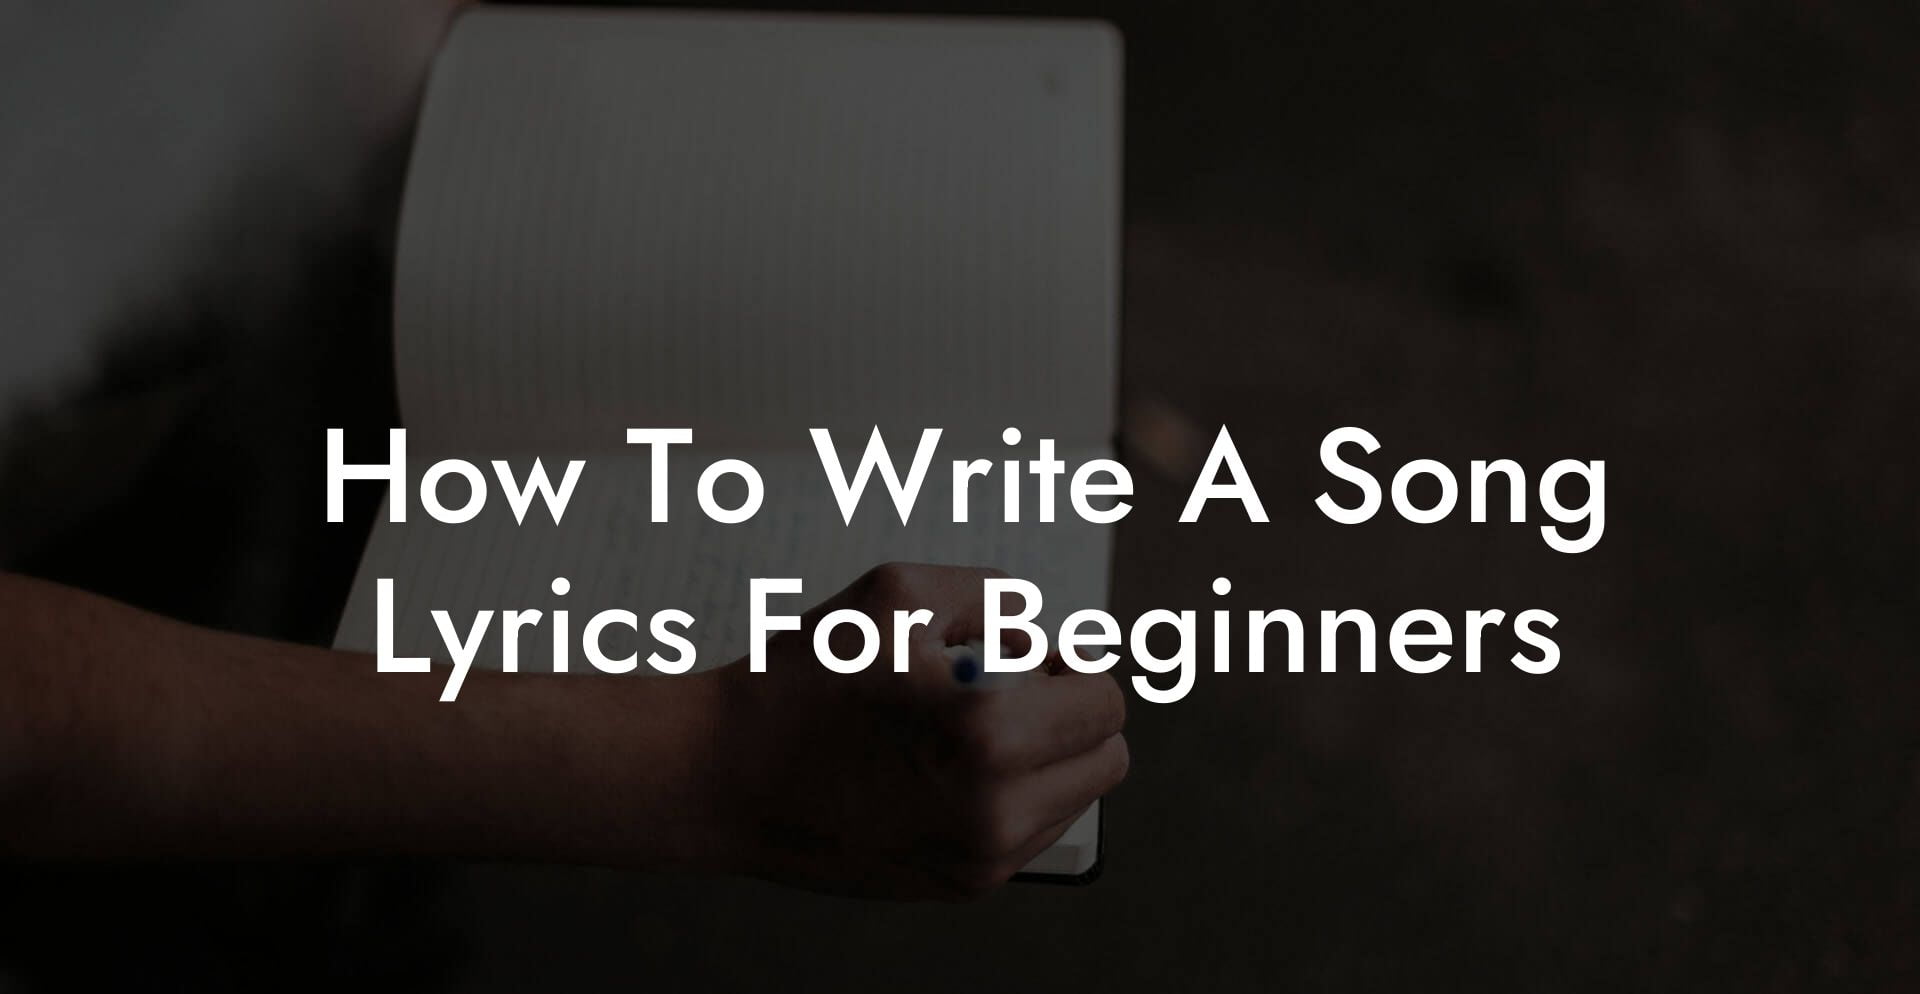 how to write a song lyrics for beginners lyric assistant